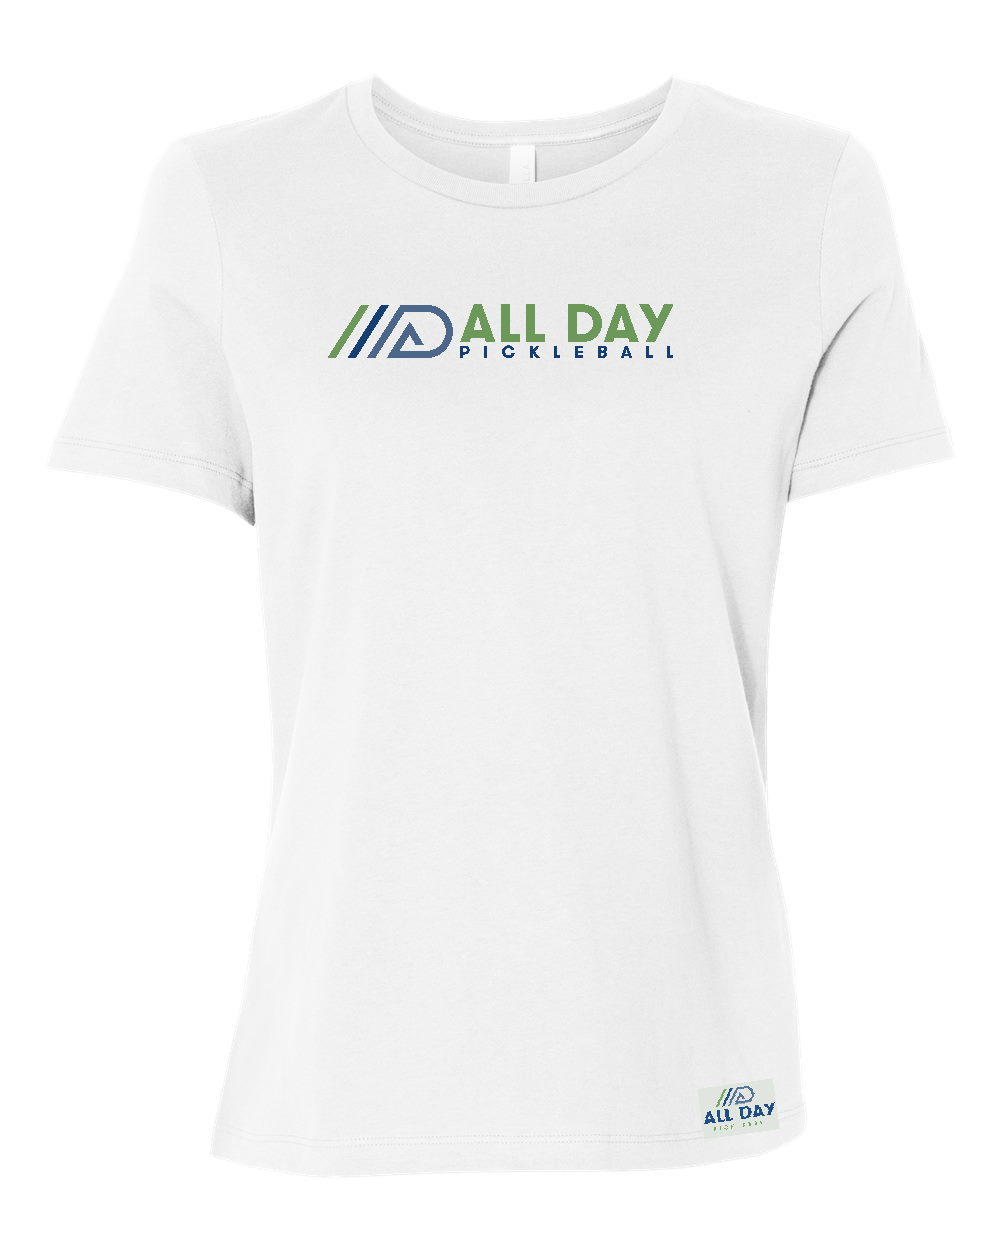 All Day Pickleball - Women's Relaxed Fit - Tee